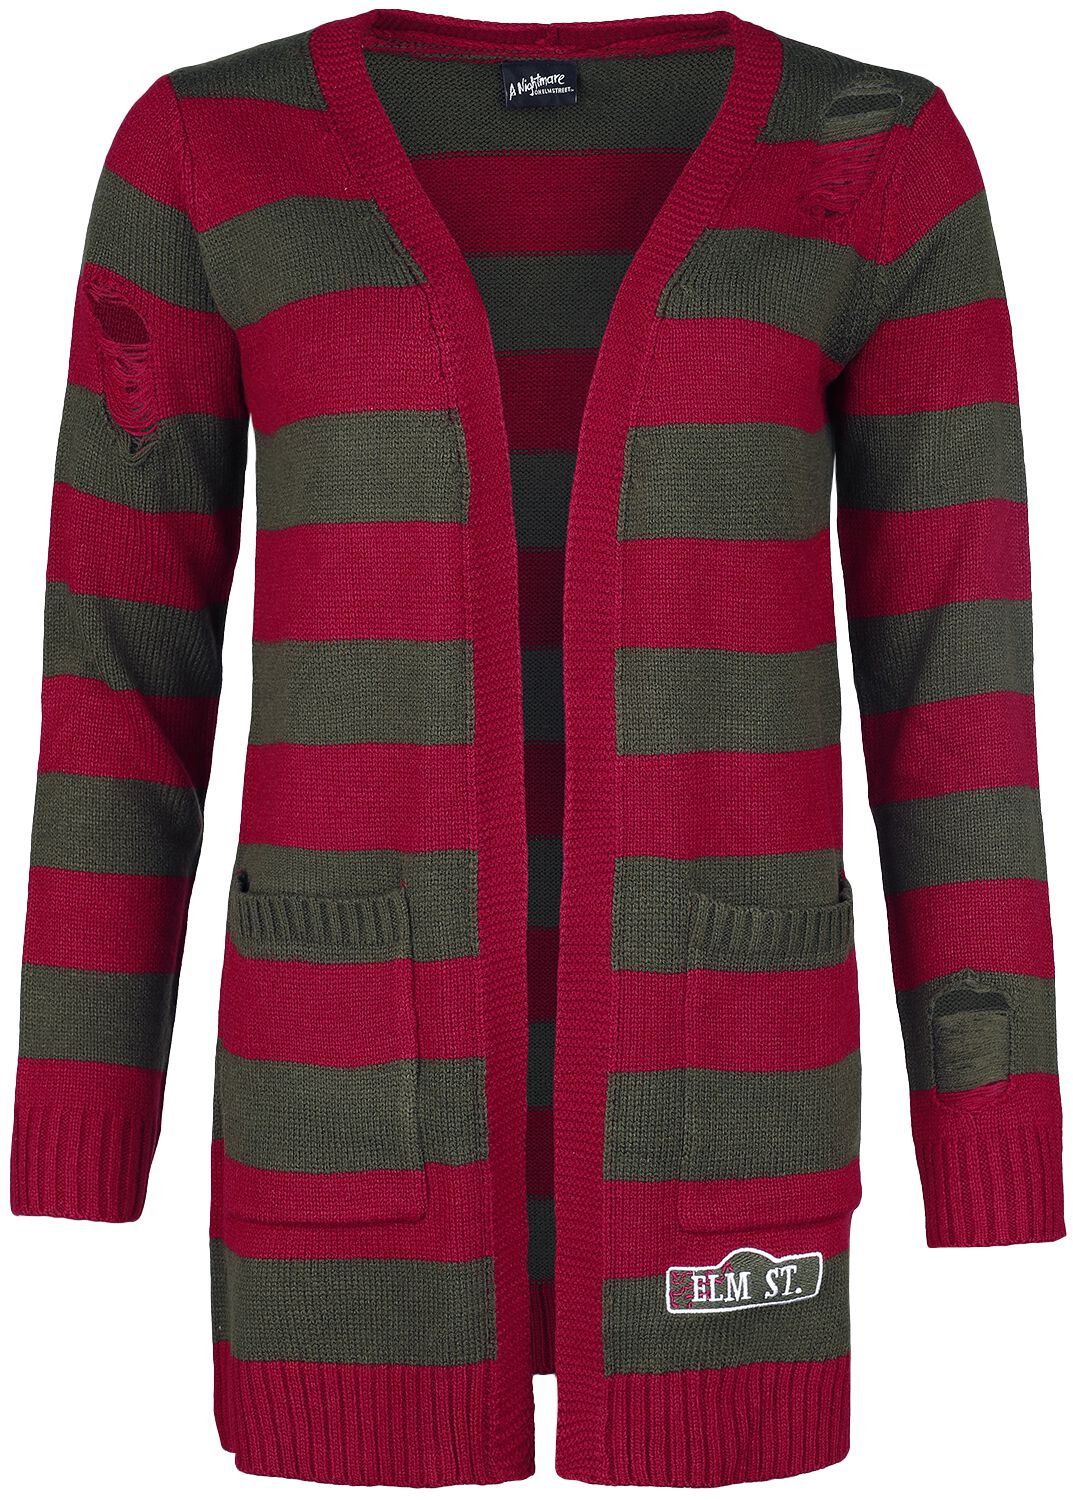 Image of Cardigan di A Nightmare On Elm Street - Elm Street - S a XXL - Donna - rosso/verde